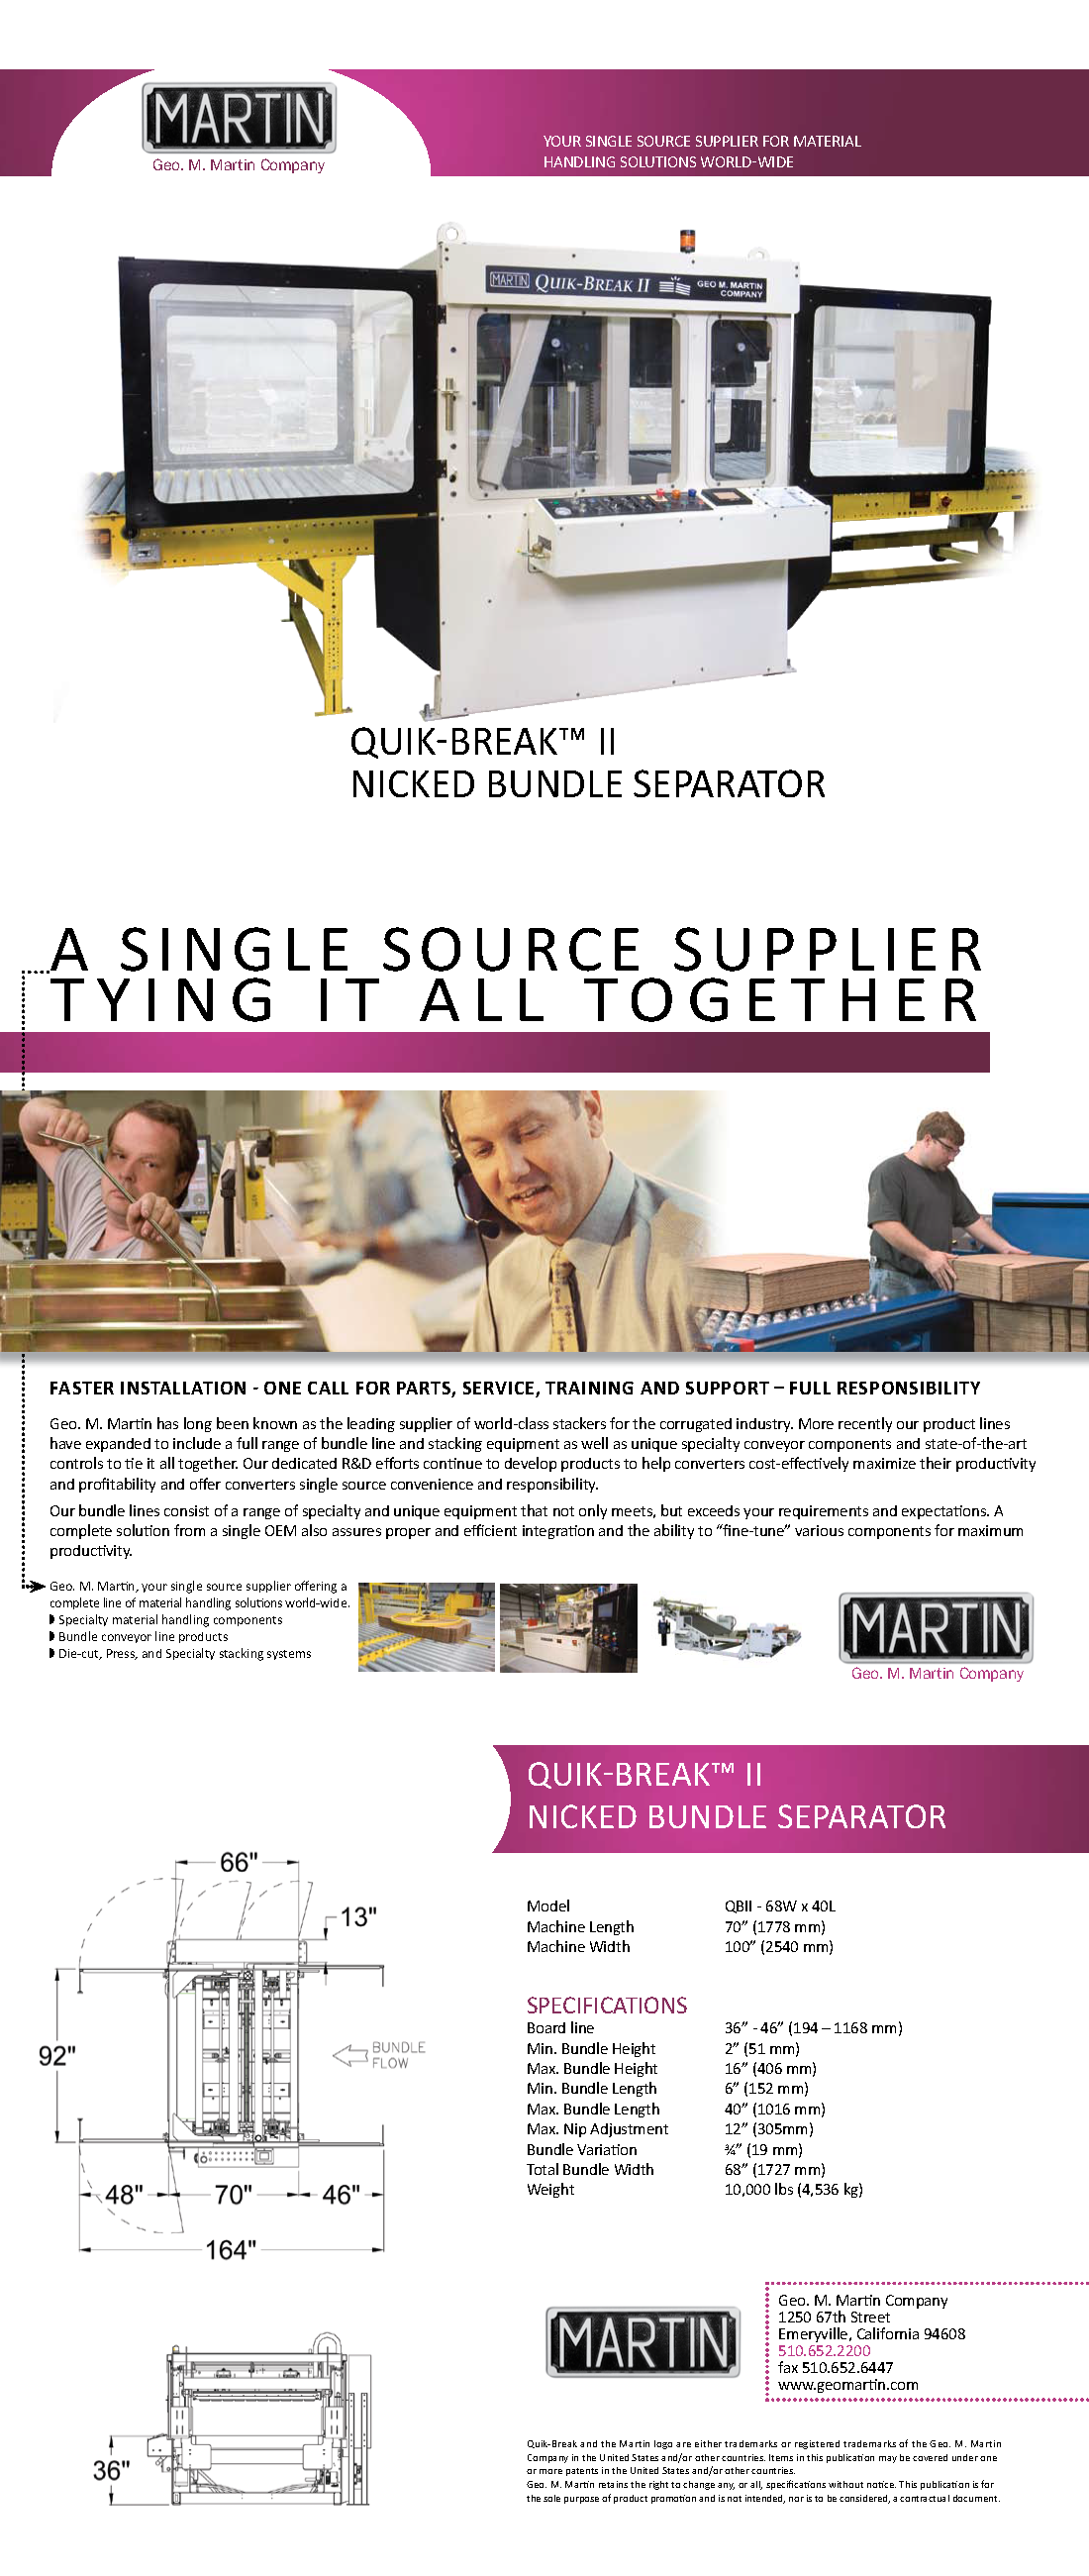 Learn more about the Quik-Break II Nicked Bundle Separator by viewing the Geo. M. Martin brochure.